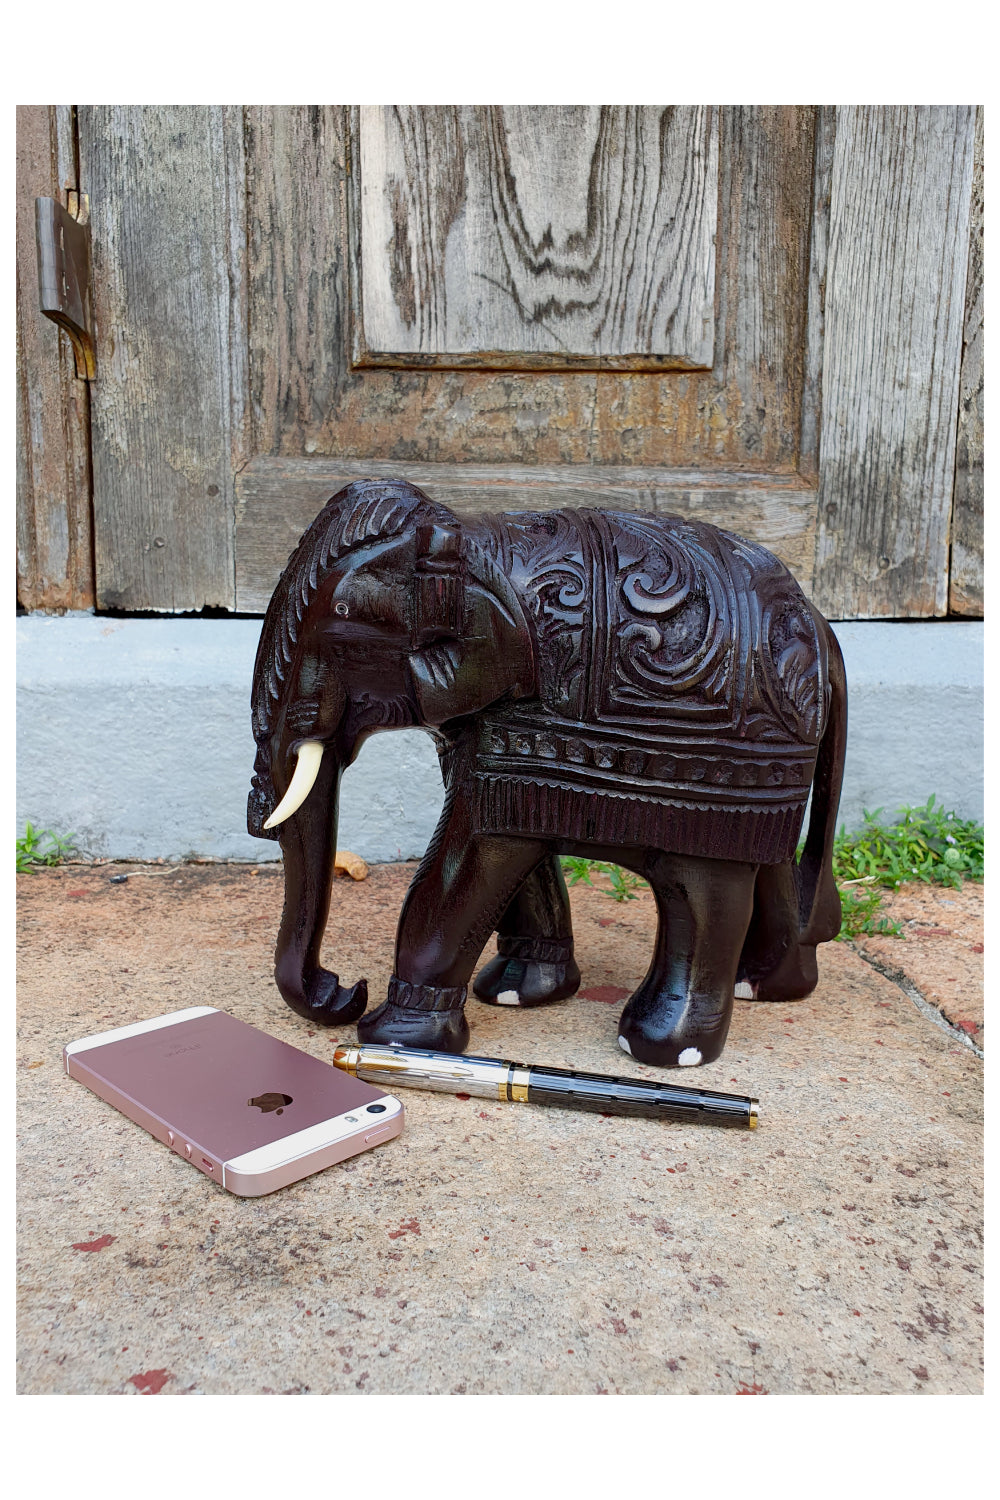 Southloom Handmade Elephant with Carved Patterns Handicraft (Carved from Rose Wood)